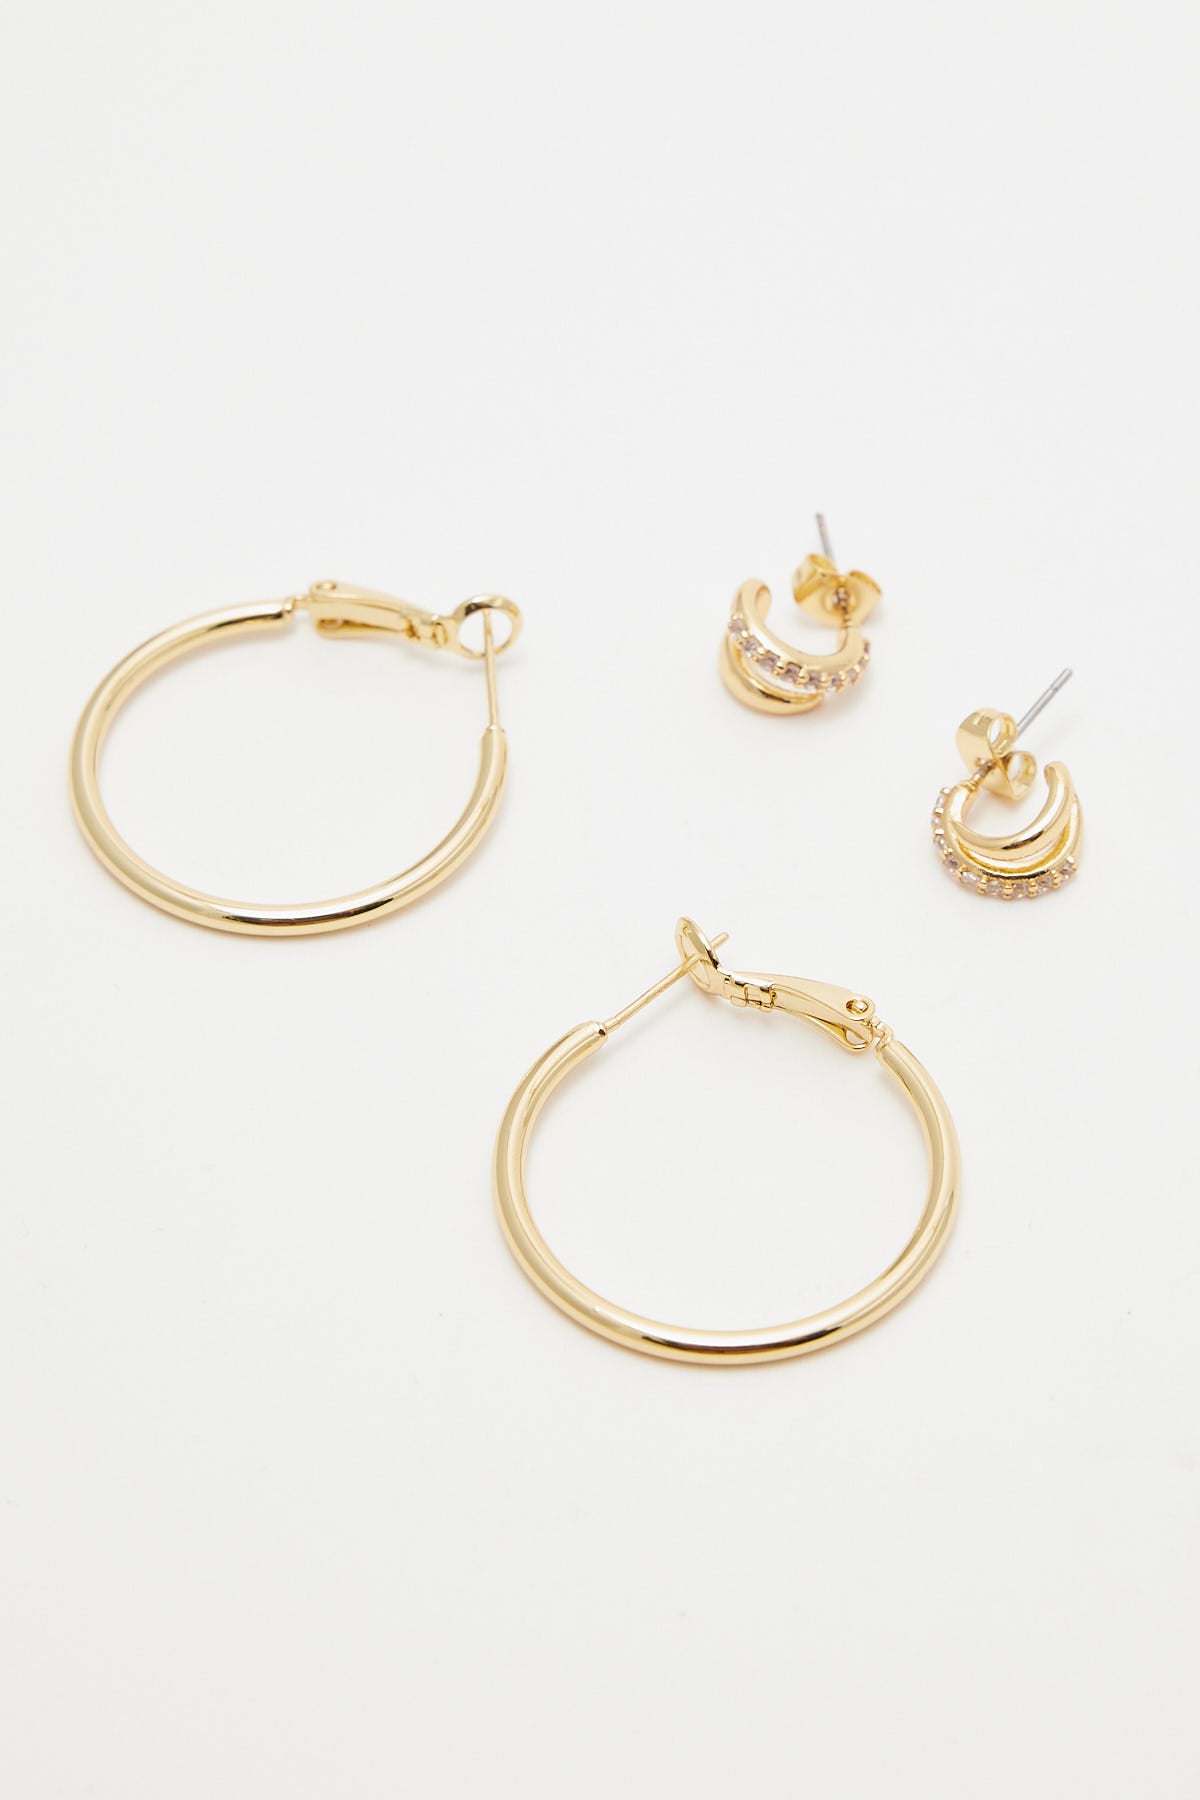 Perfect Stranger Twin Treasure Gold Hoop Earrings 2 Pack 18K Gold Plated